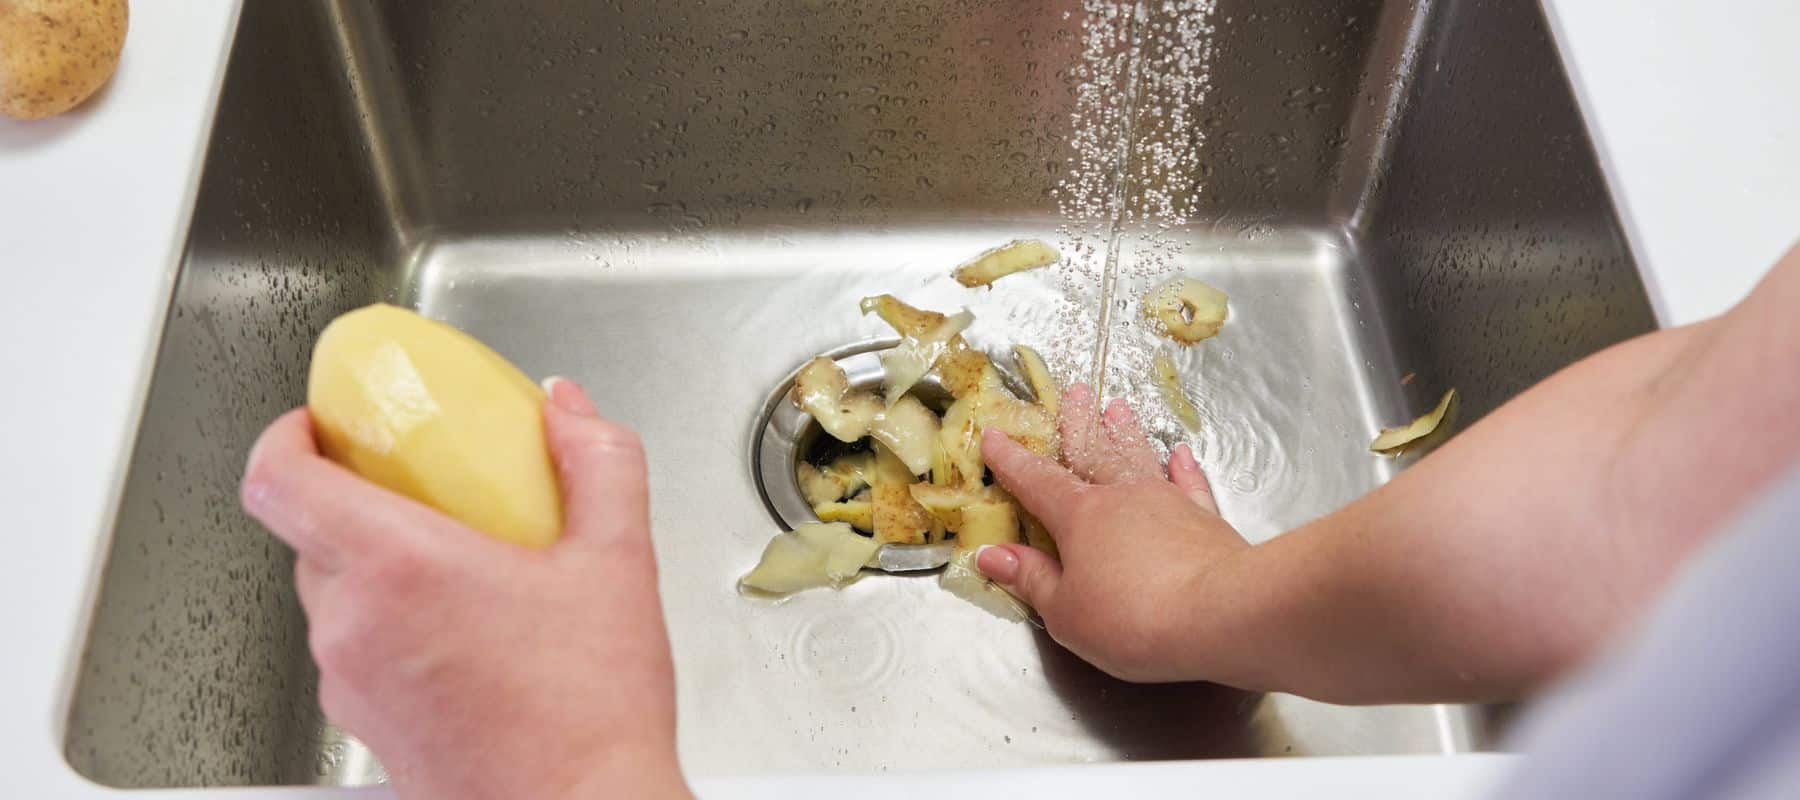 person peeling potatoes over their sink and pushing the skin down the drain